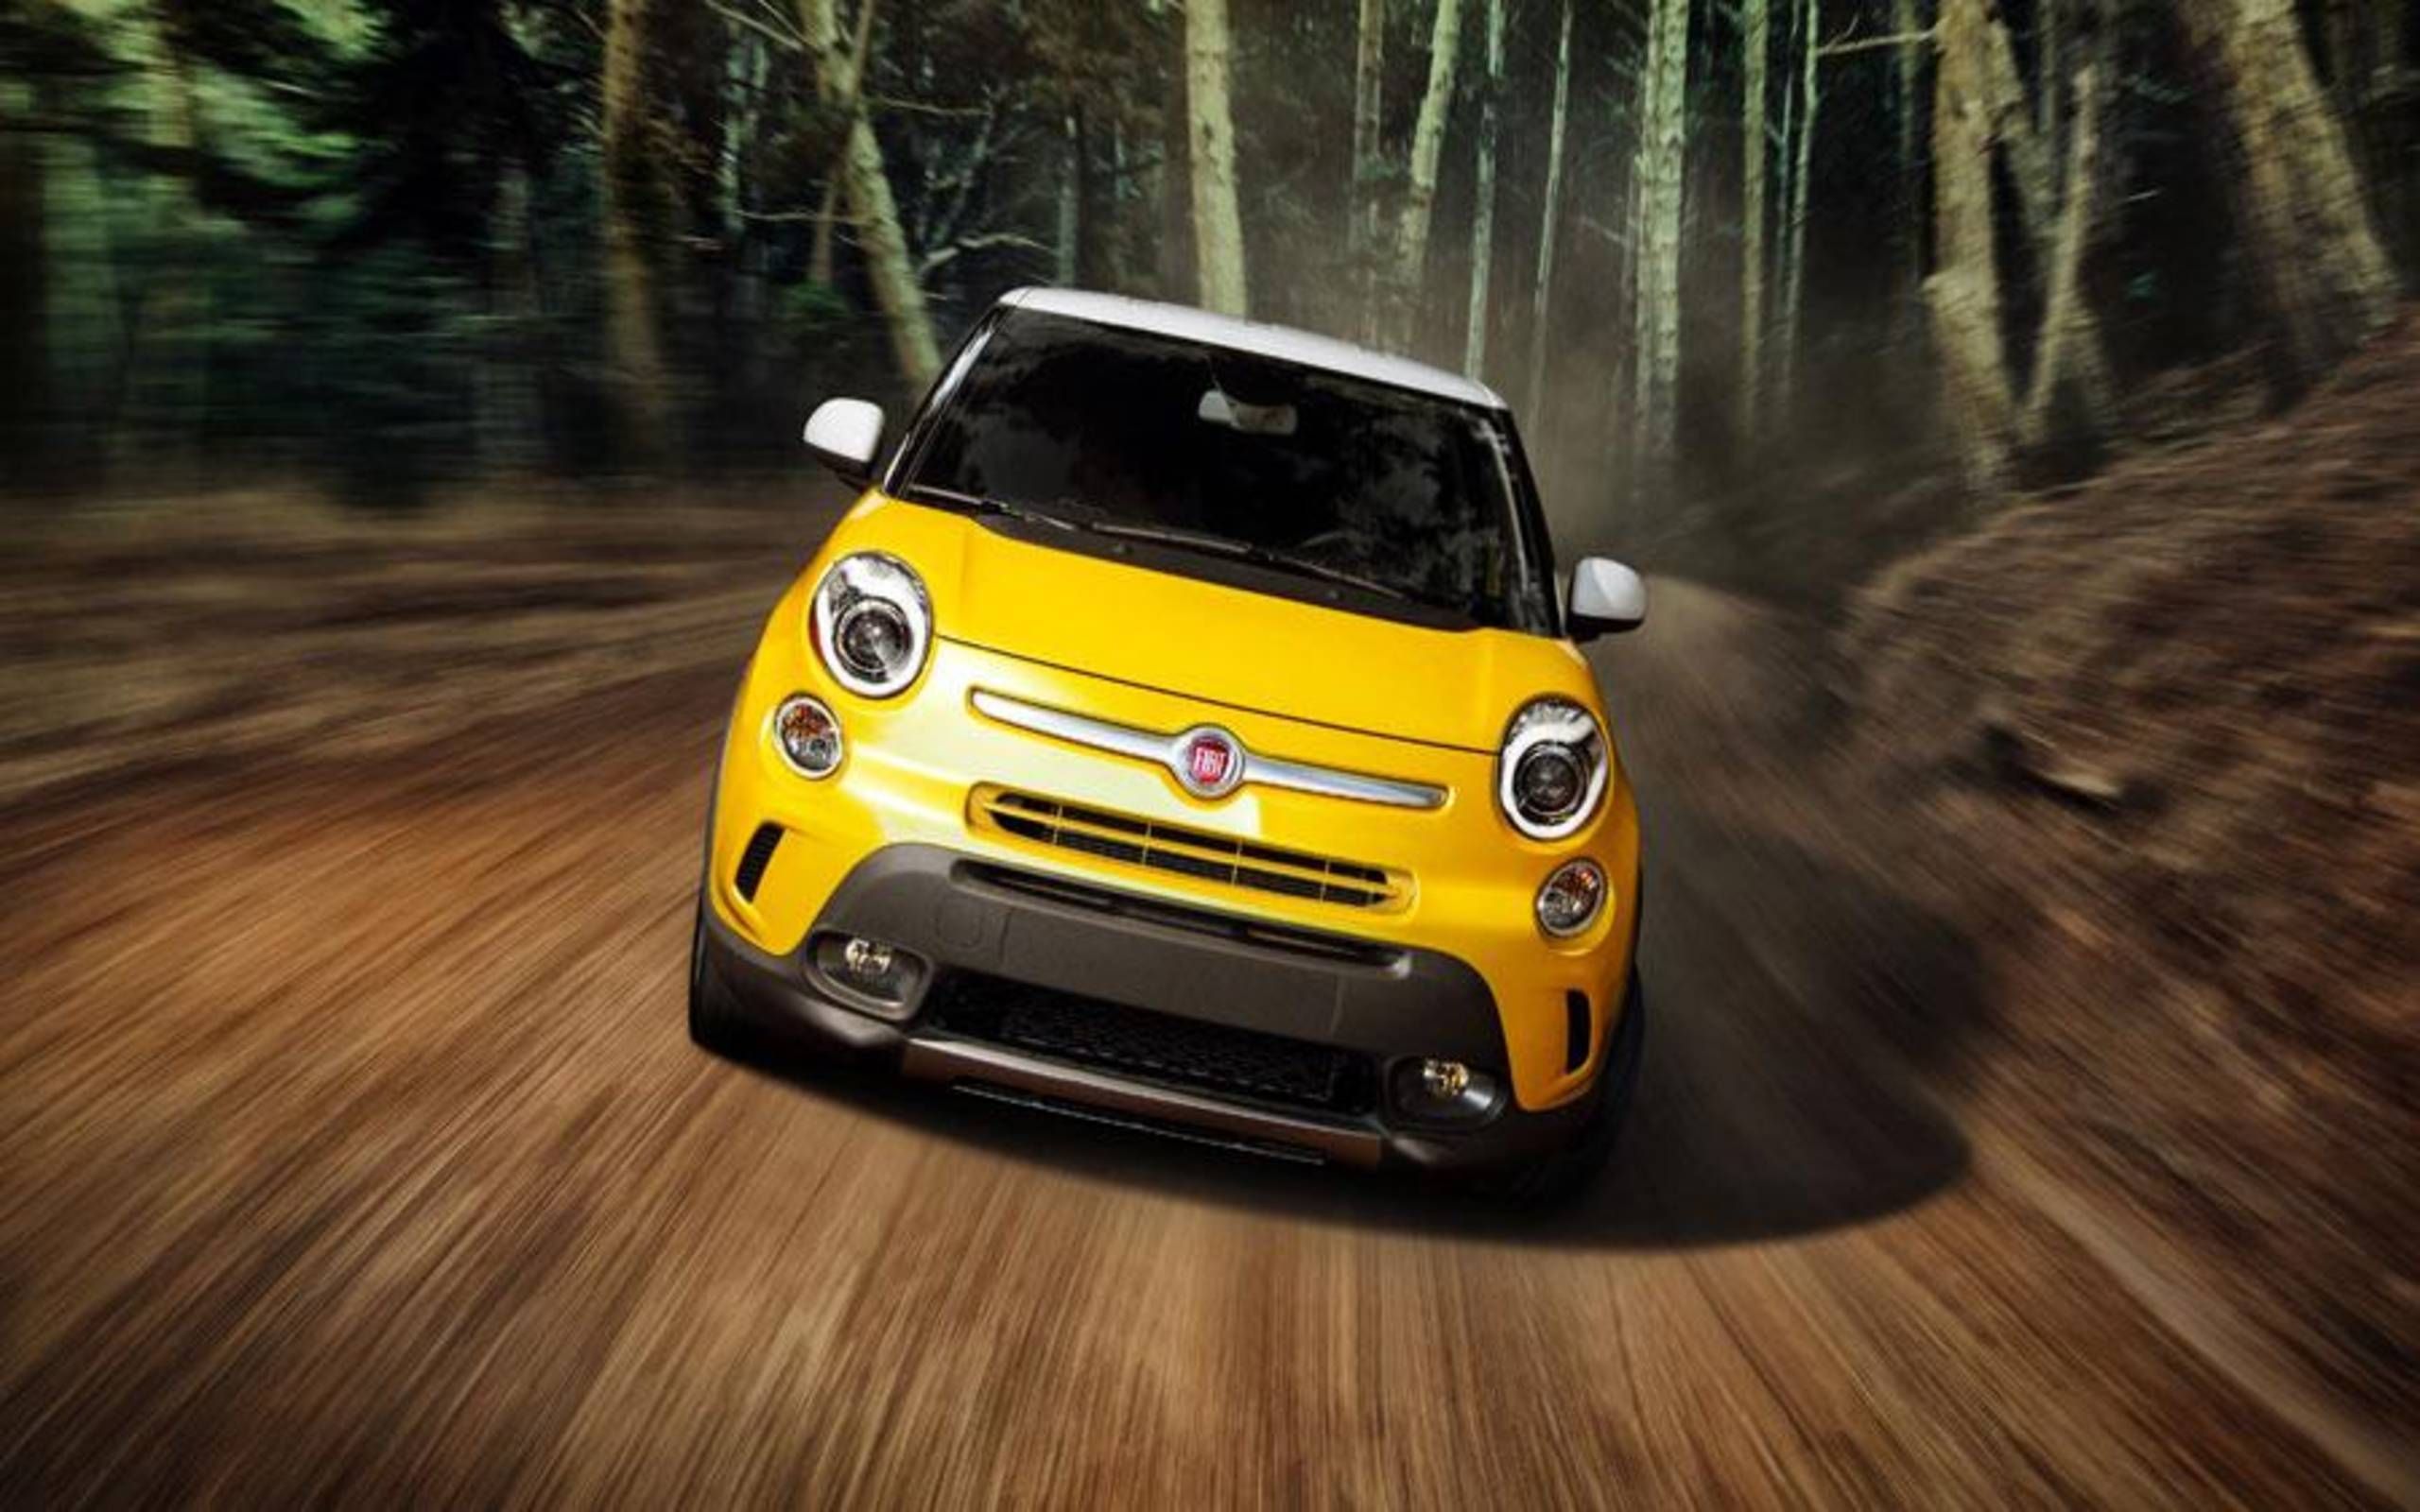 2014 Fiat 500L Easy review notes